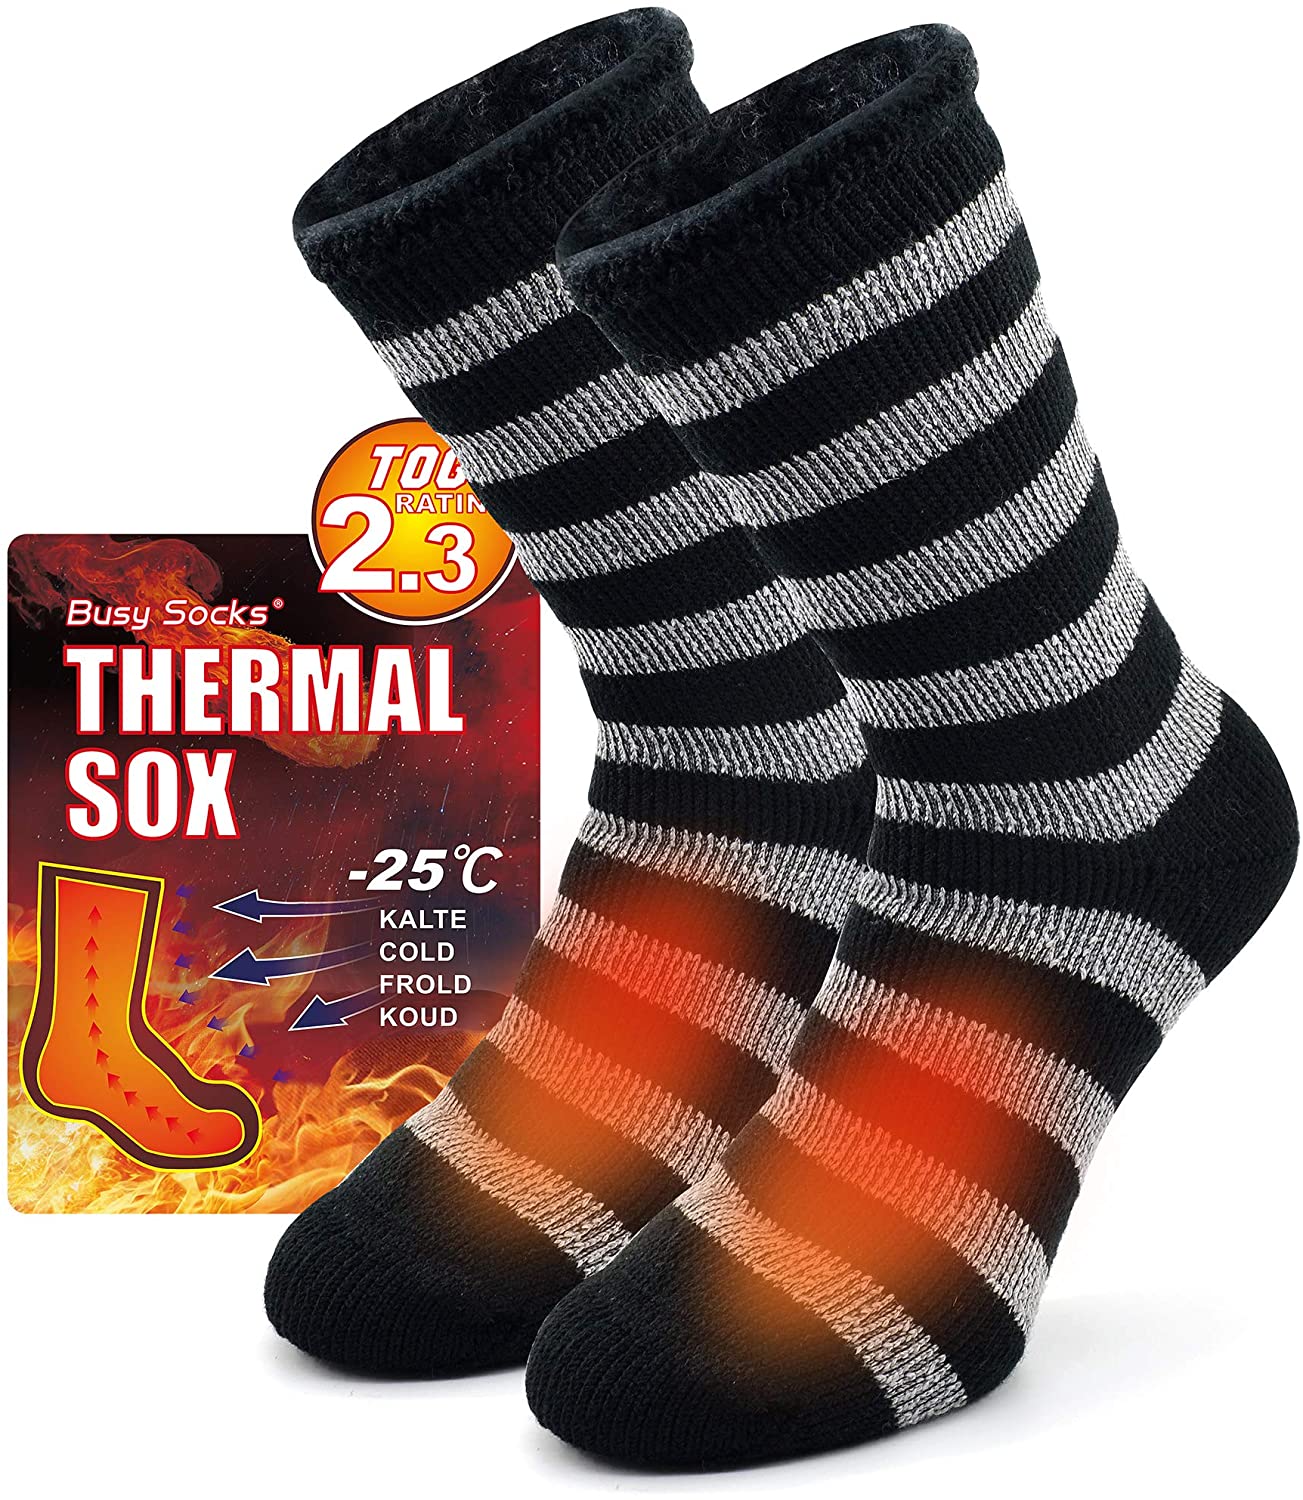 Winter Warm Thermal Socks for Men Women, Busy Socks Extra Thick